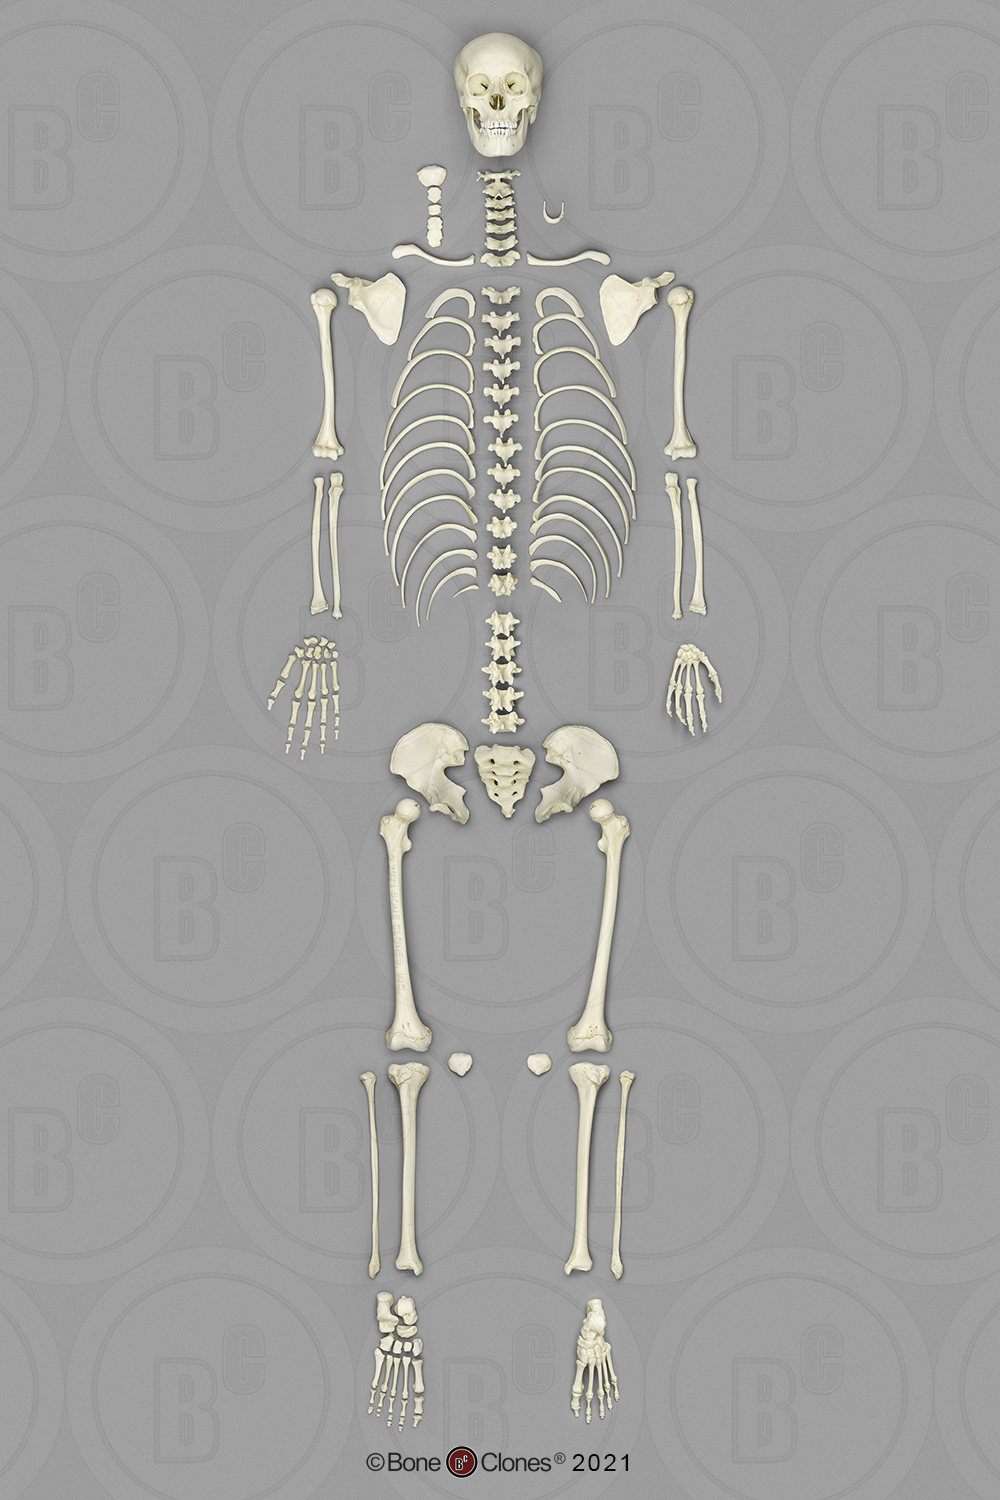 Articulated Human 14 to 16-month-old Child Skeleton - Bone Clones